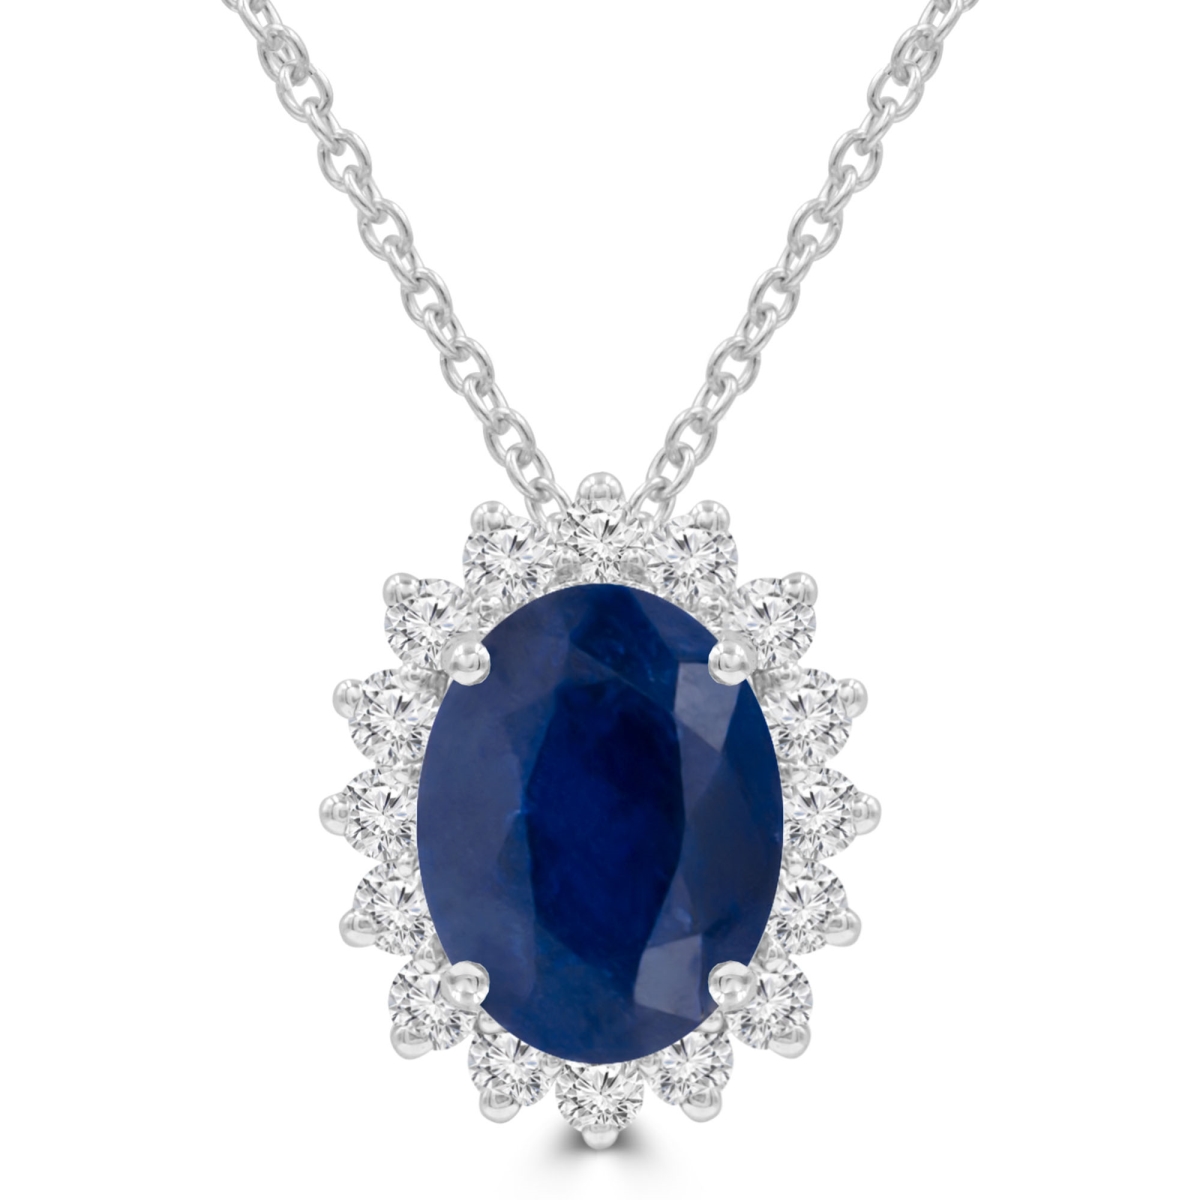 Picture of Majesty Diamonds MDR220137 3.8 CTW Oval Blue Sapphire Oval Floral Halo Pendant Necklace in 14K White Gold